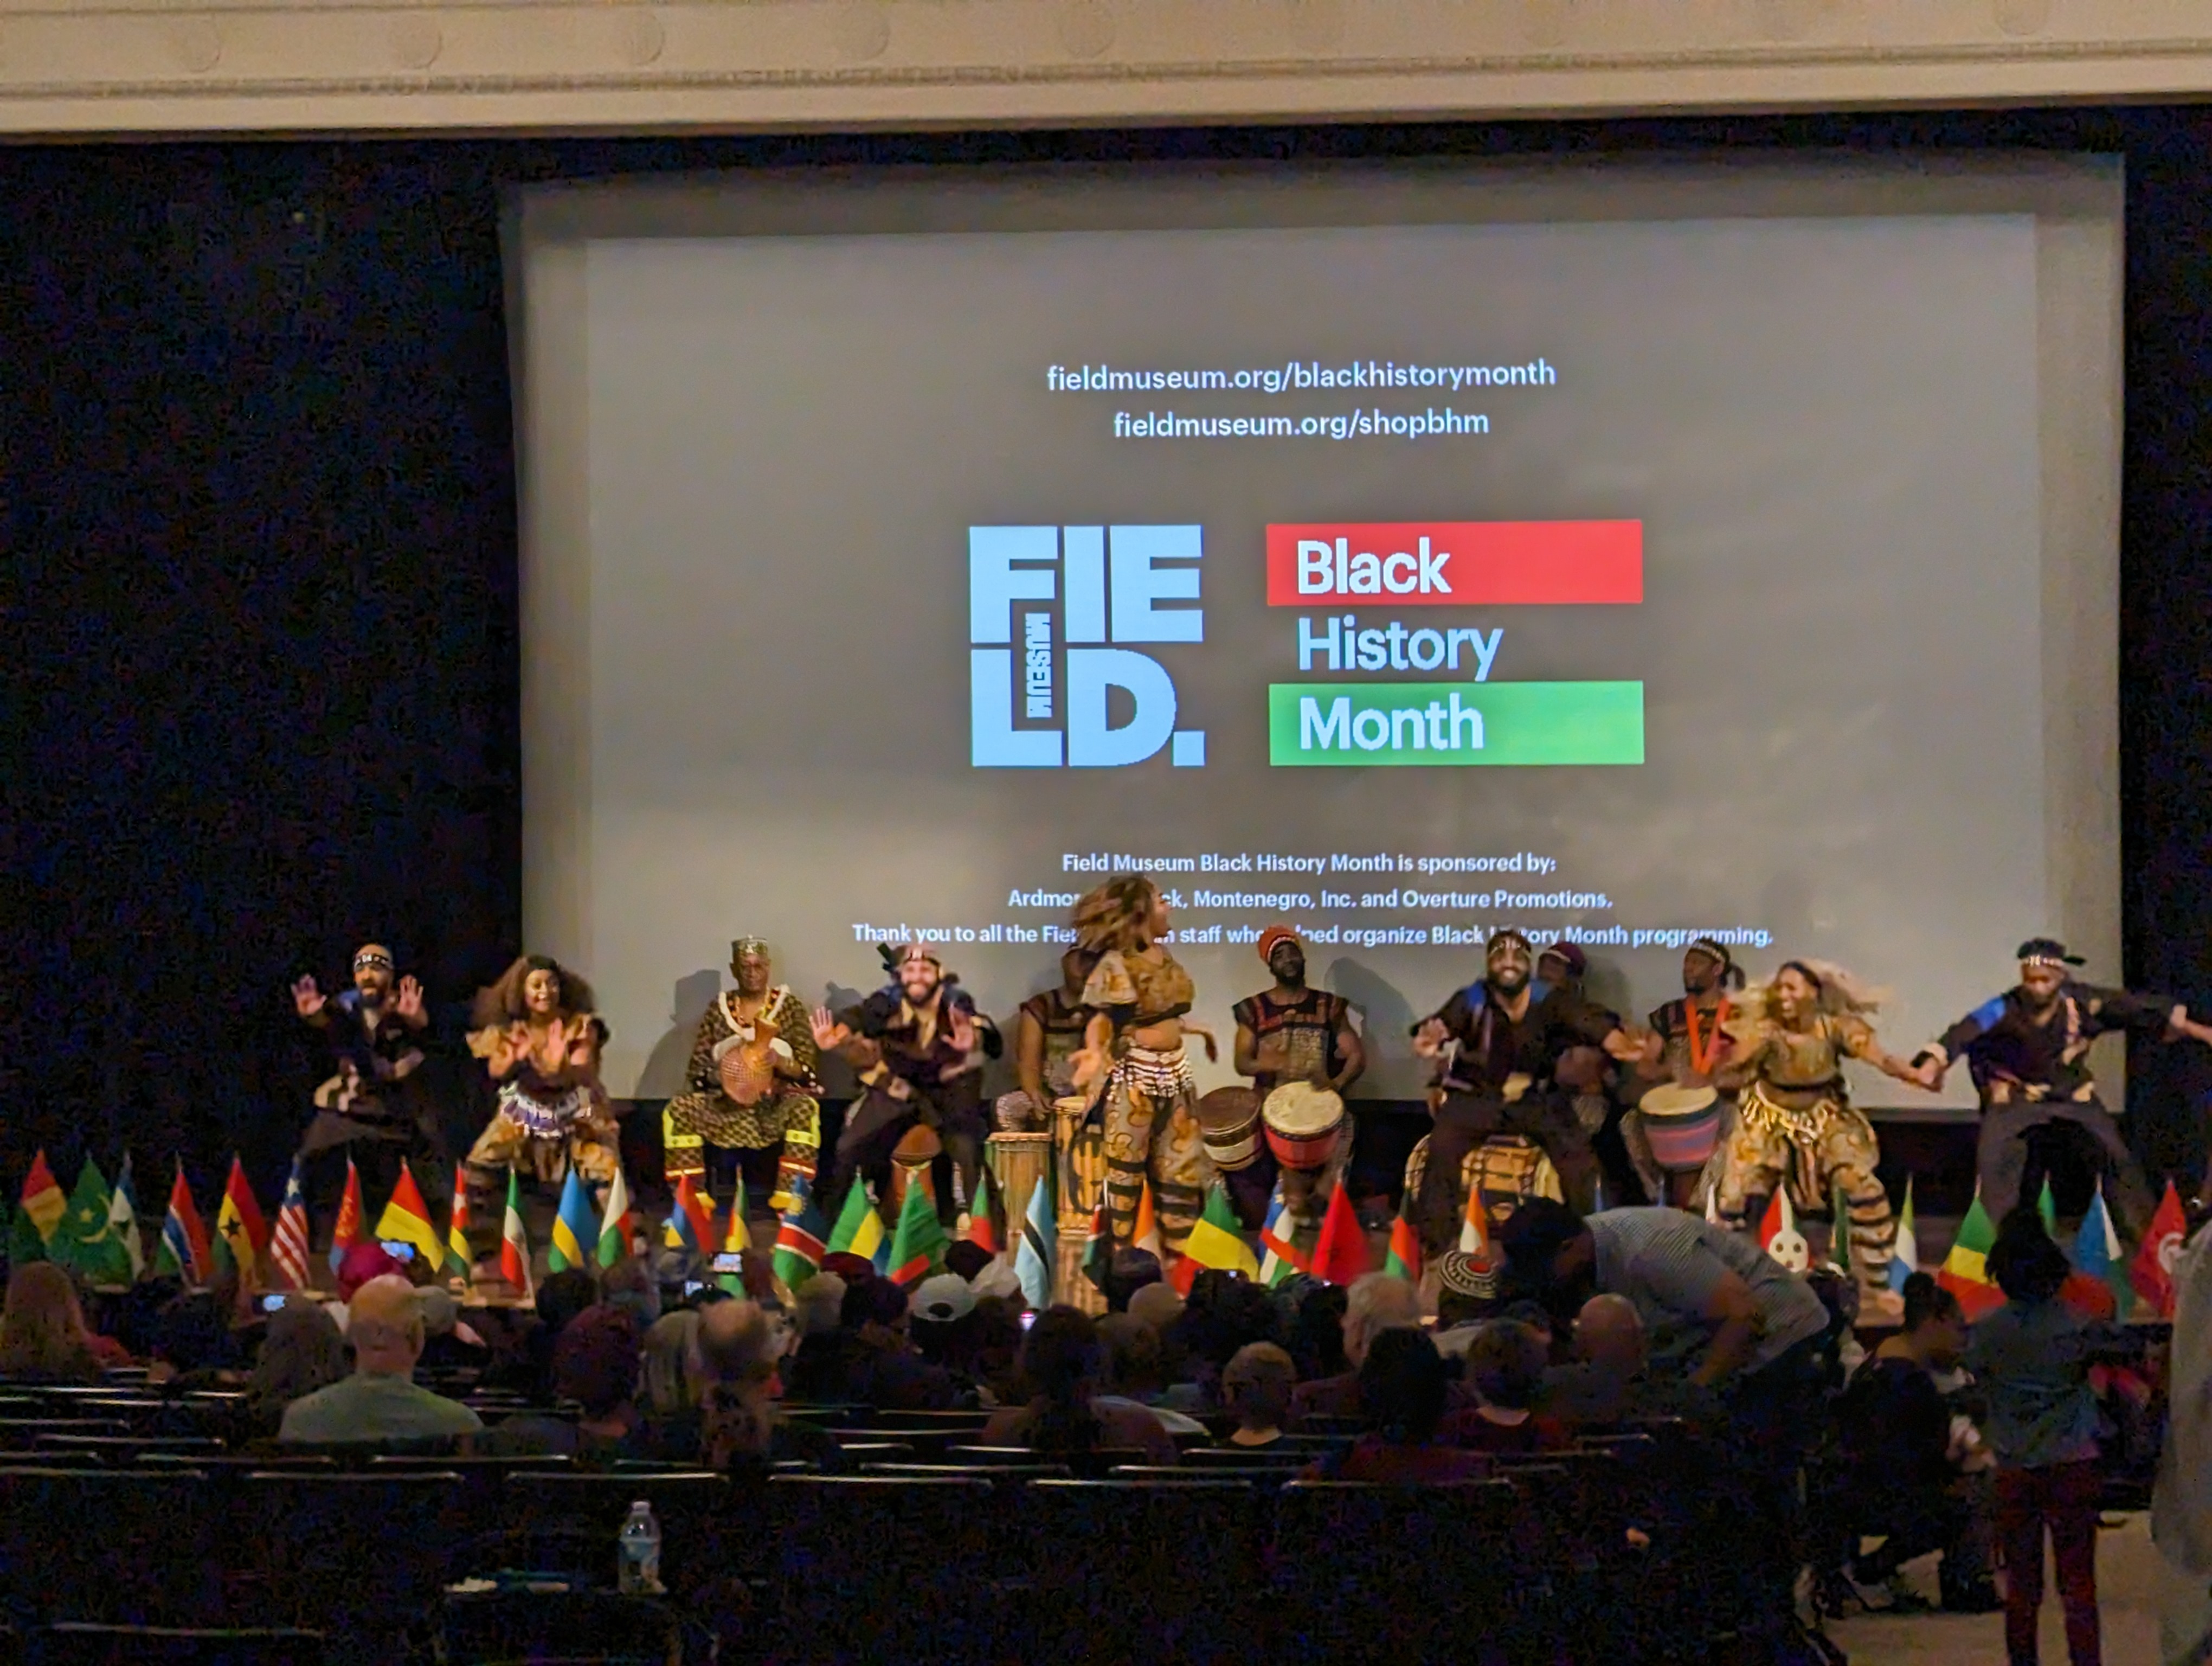 a group performs on a stage in front of an audience. A large screen behind the performers shows Field Museum and Black History Month logos.